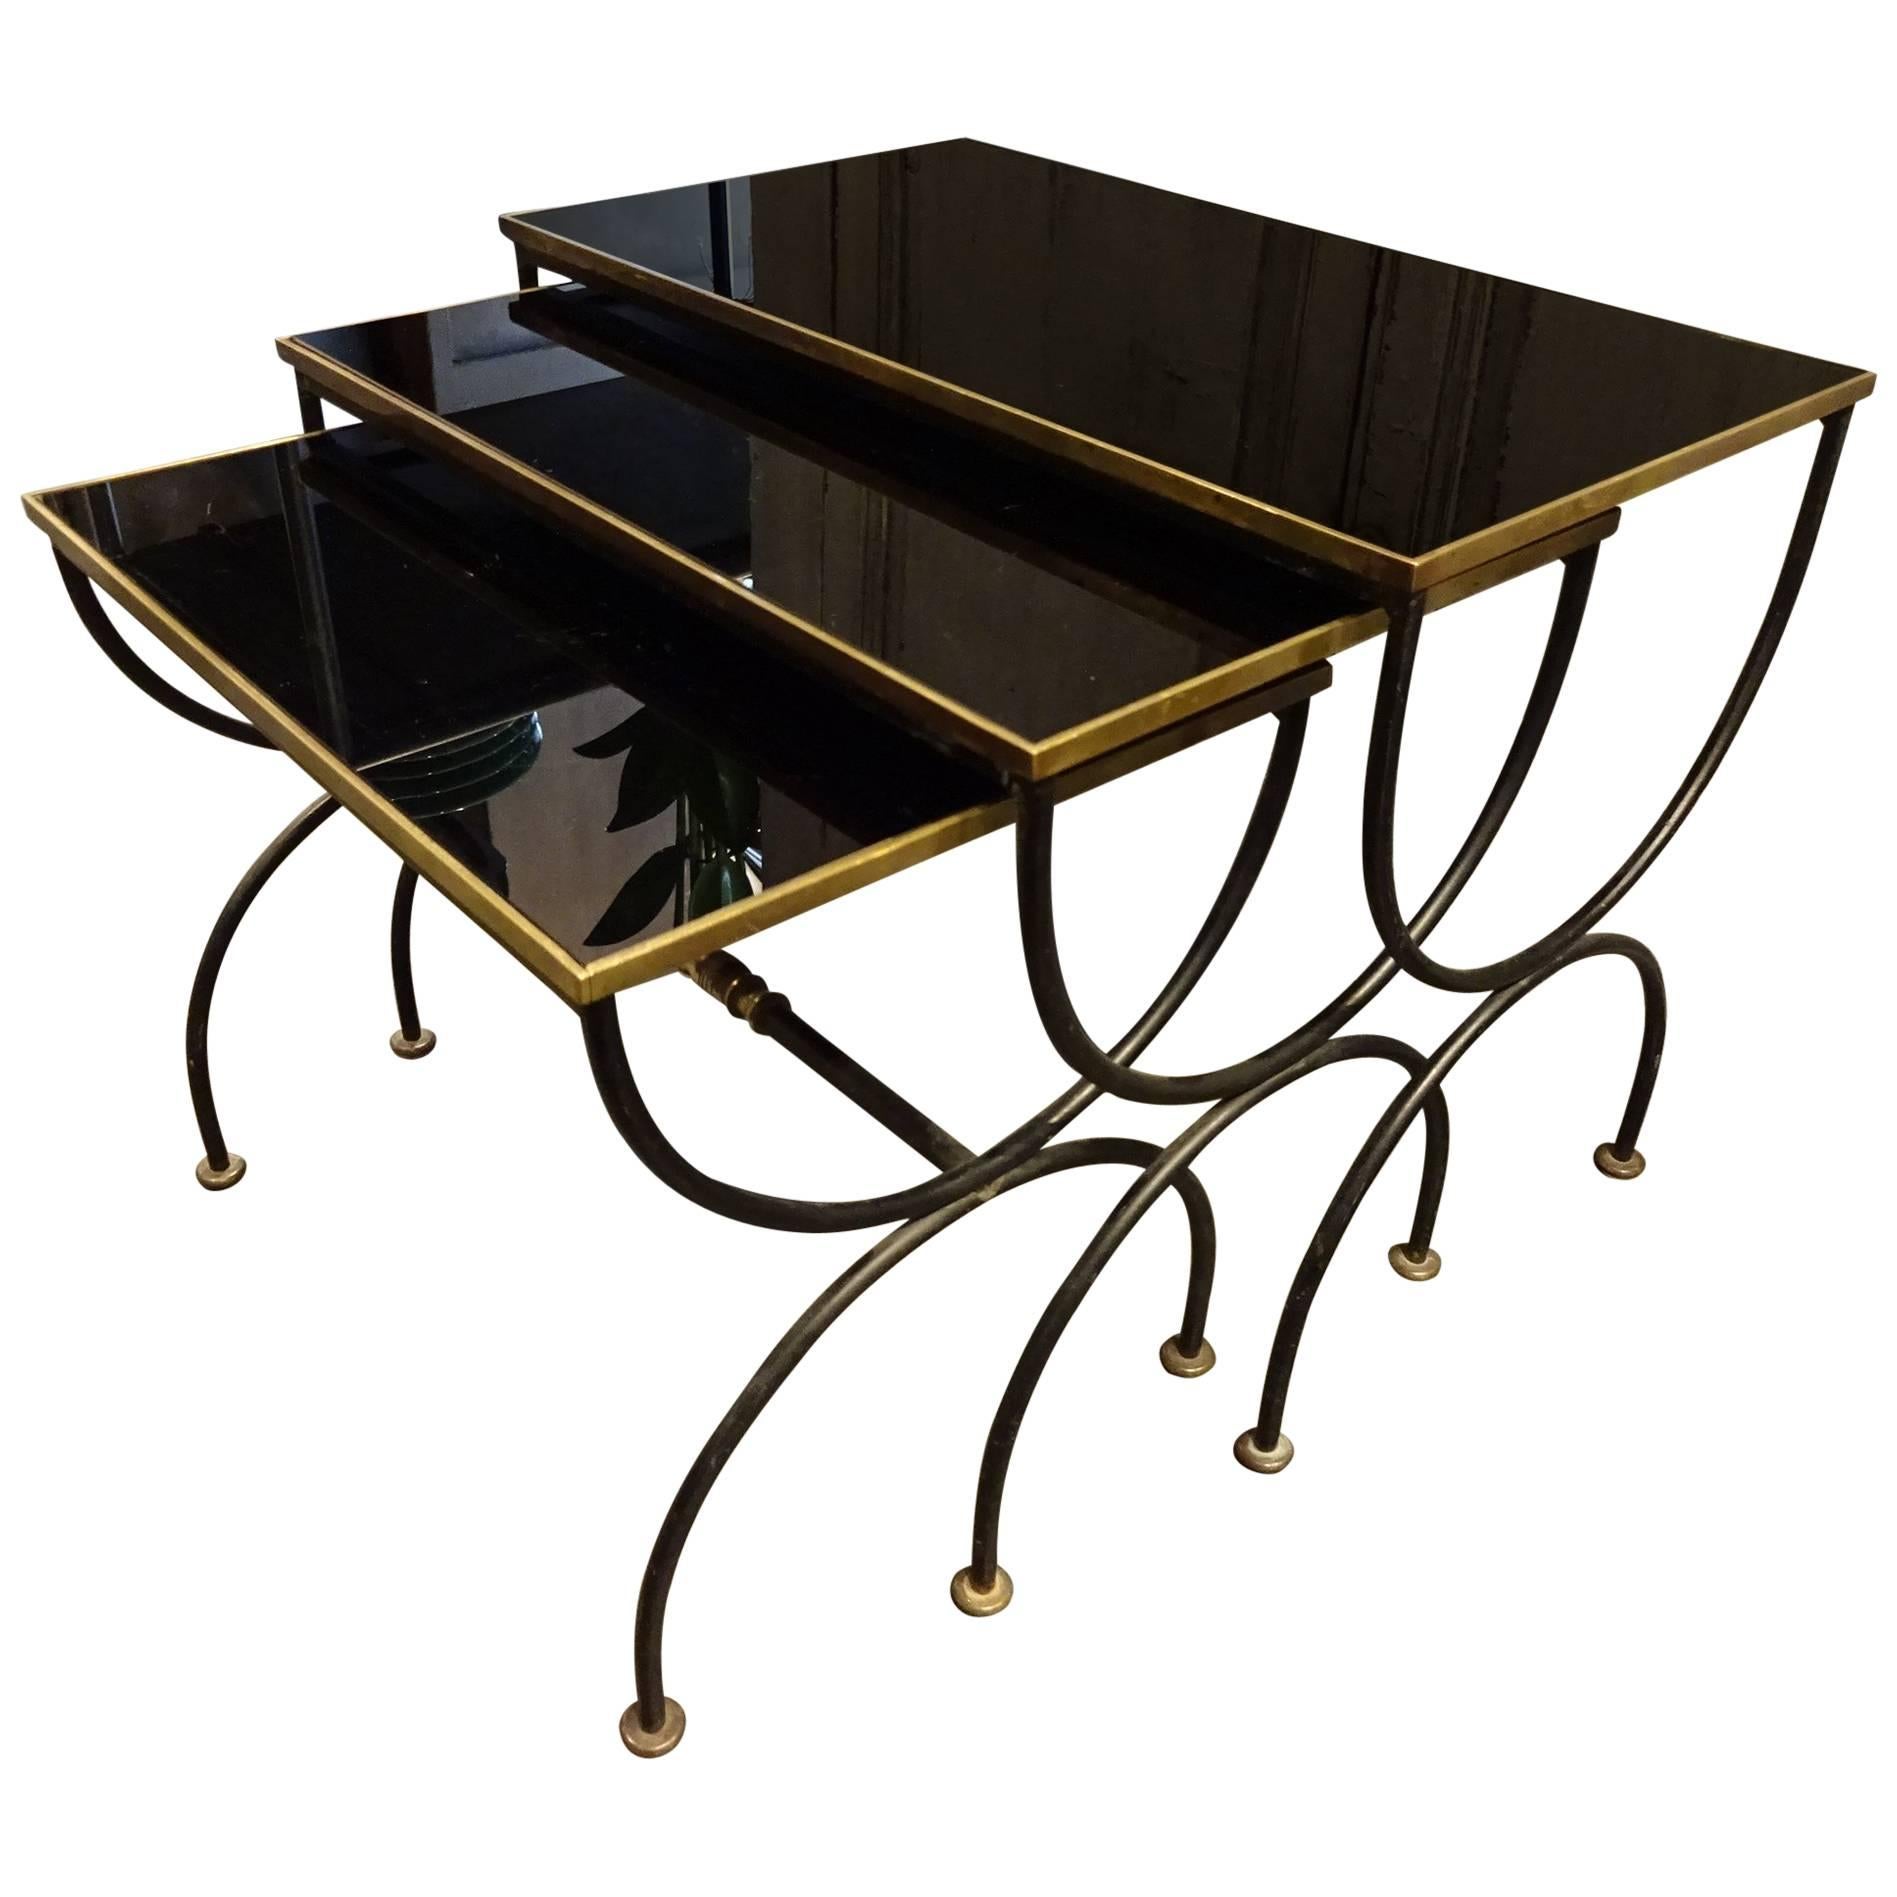 Mid-20th Century French Nesting Tables